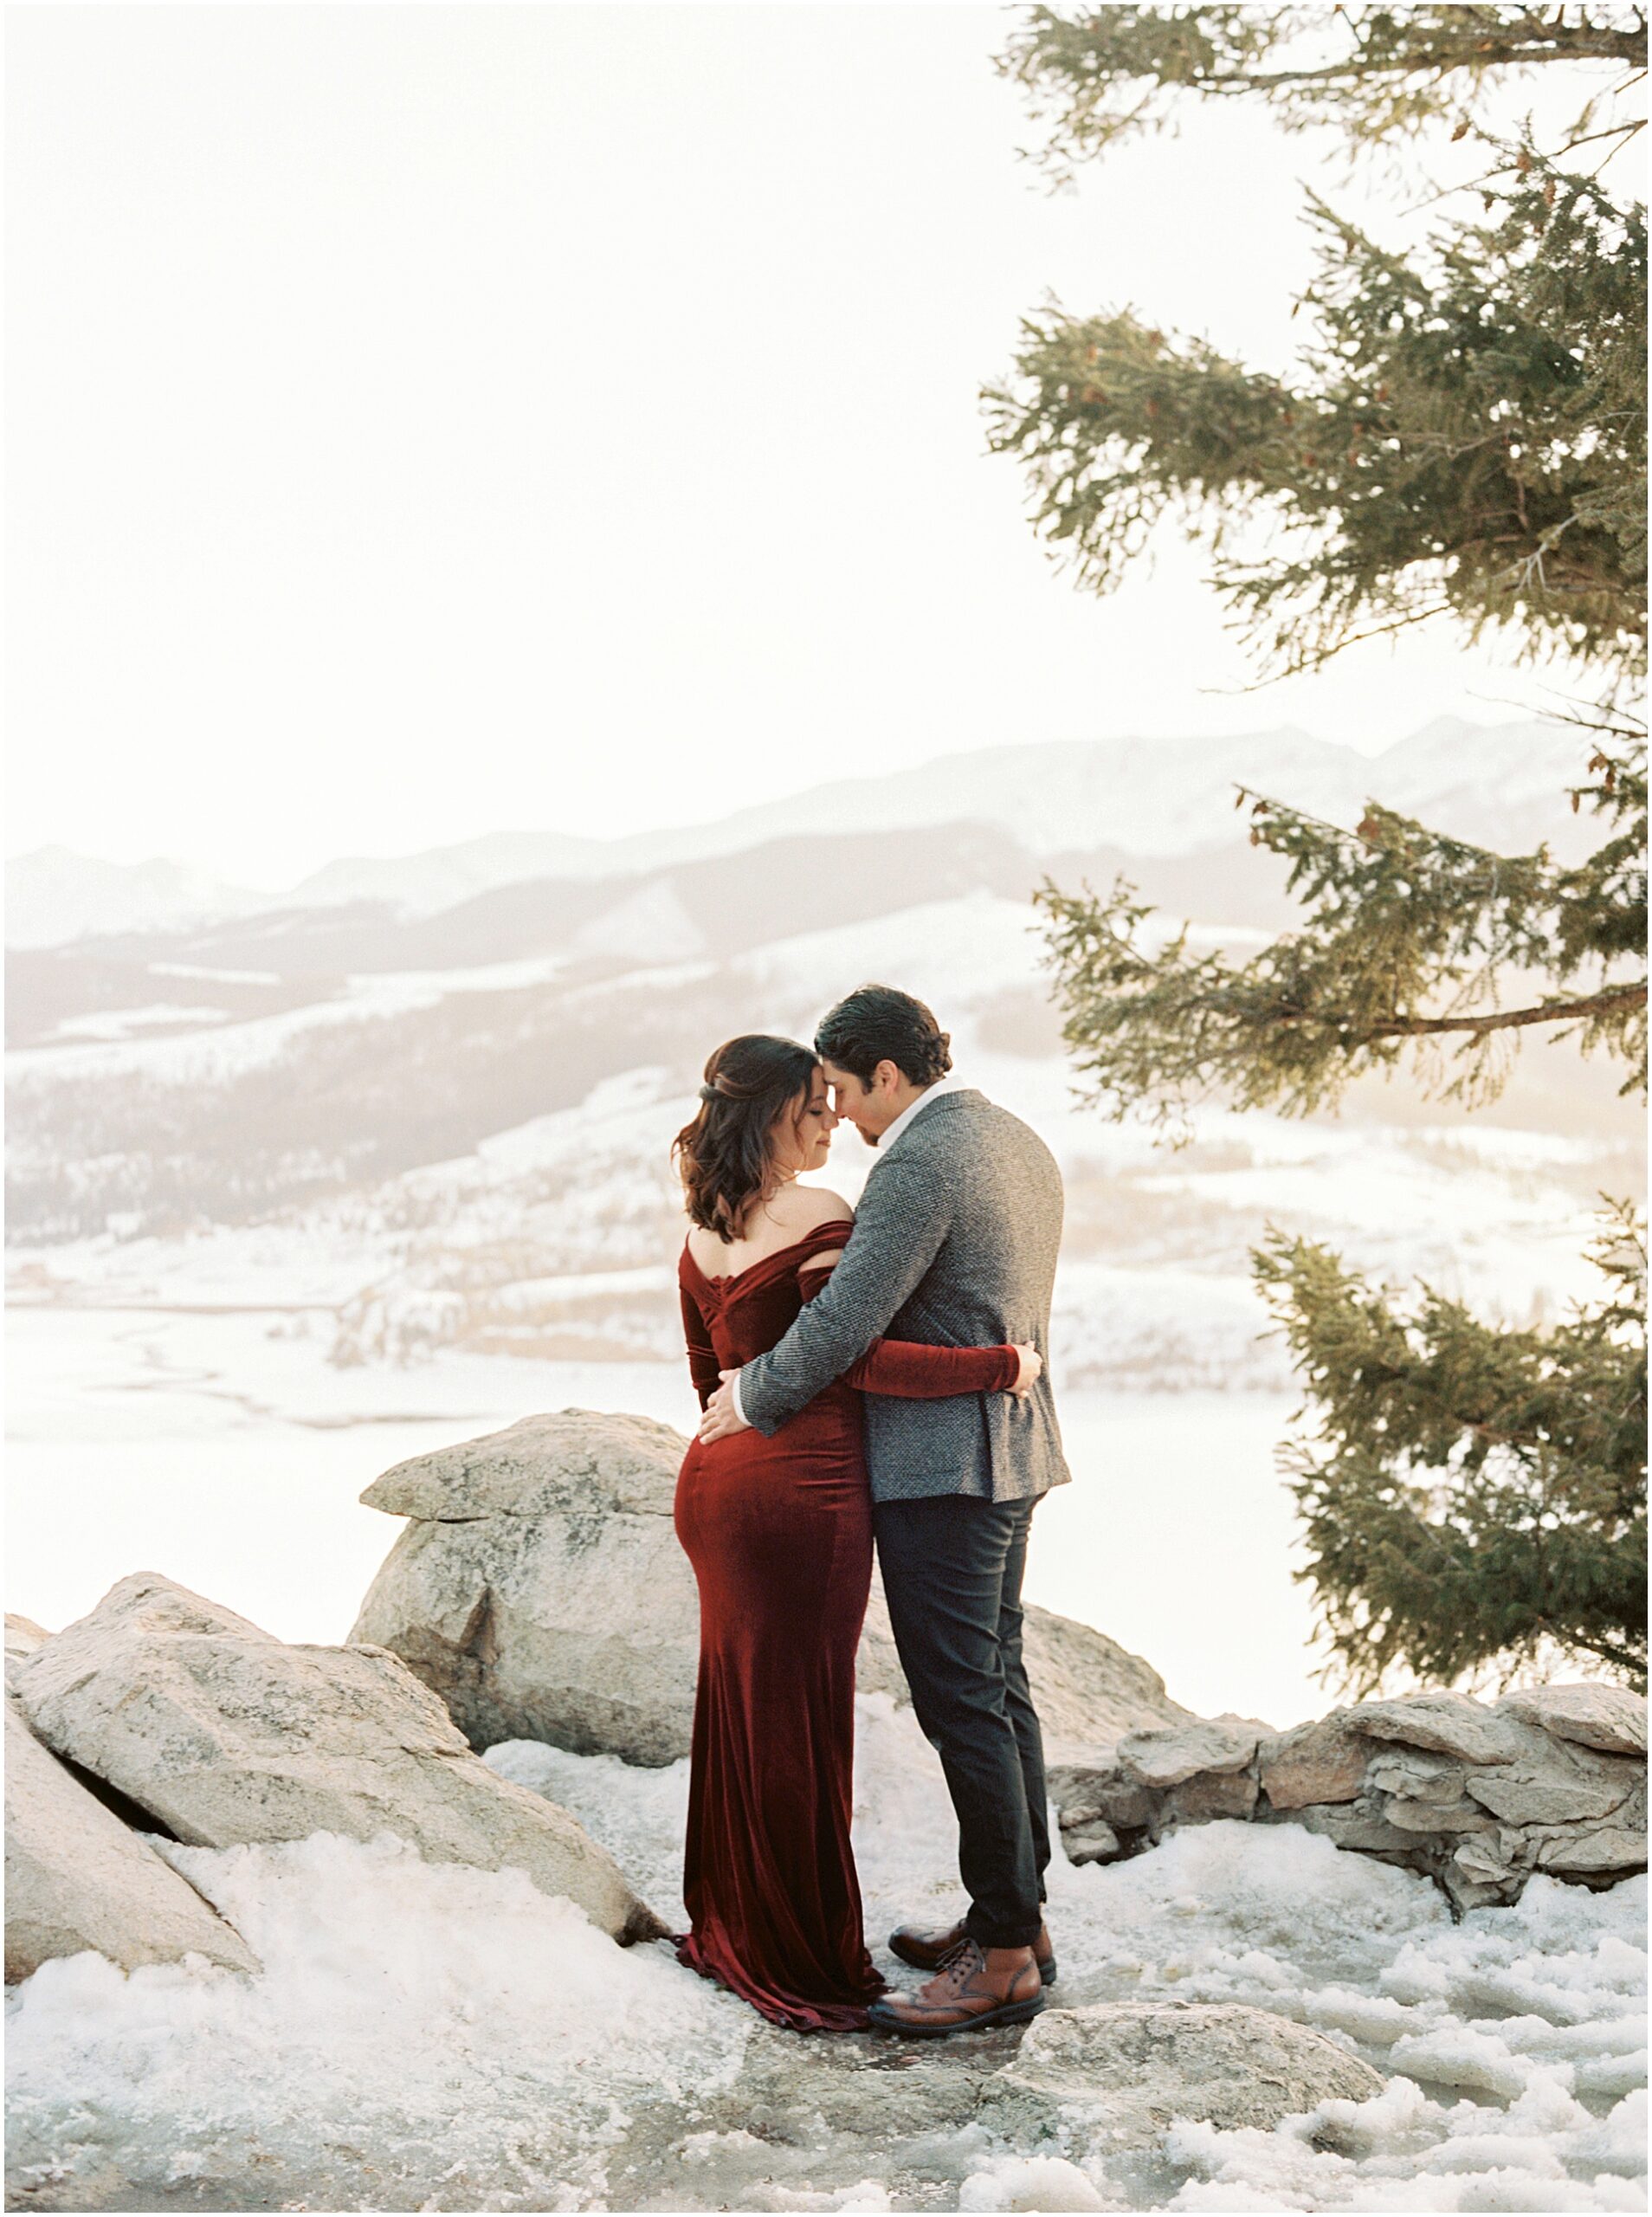 A couple at Sapphire Point, Colorado, overlooking the mountains and Lake Dillon.